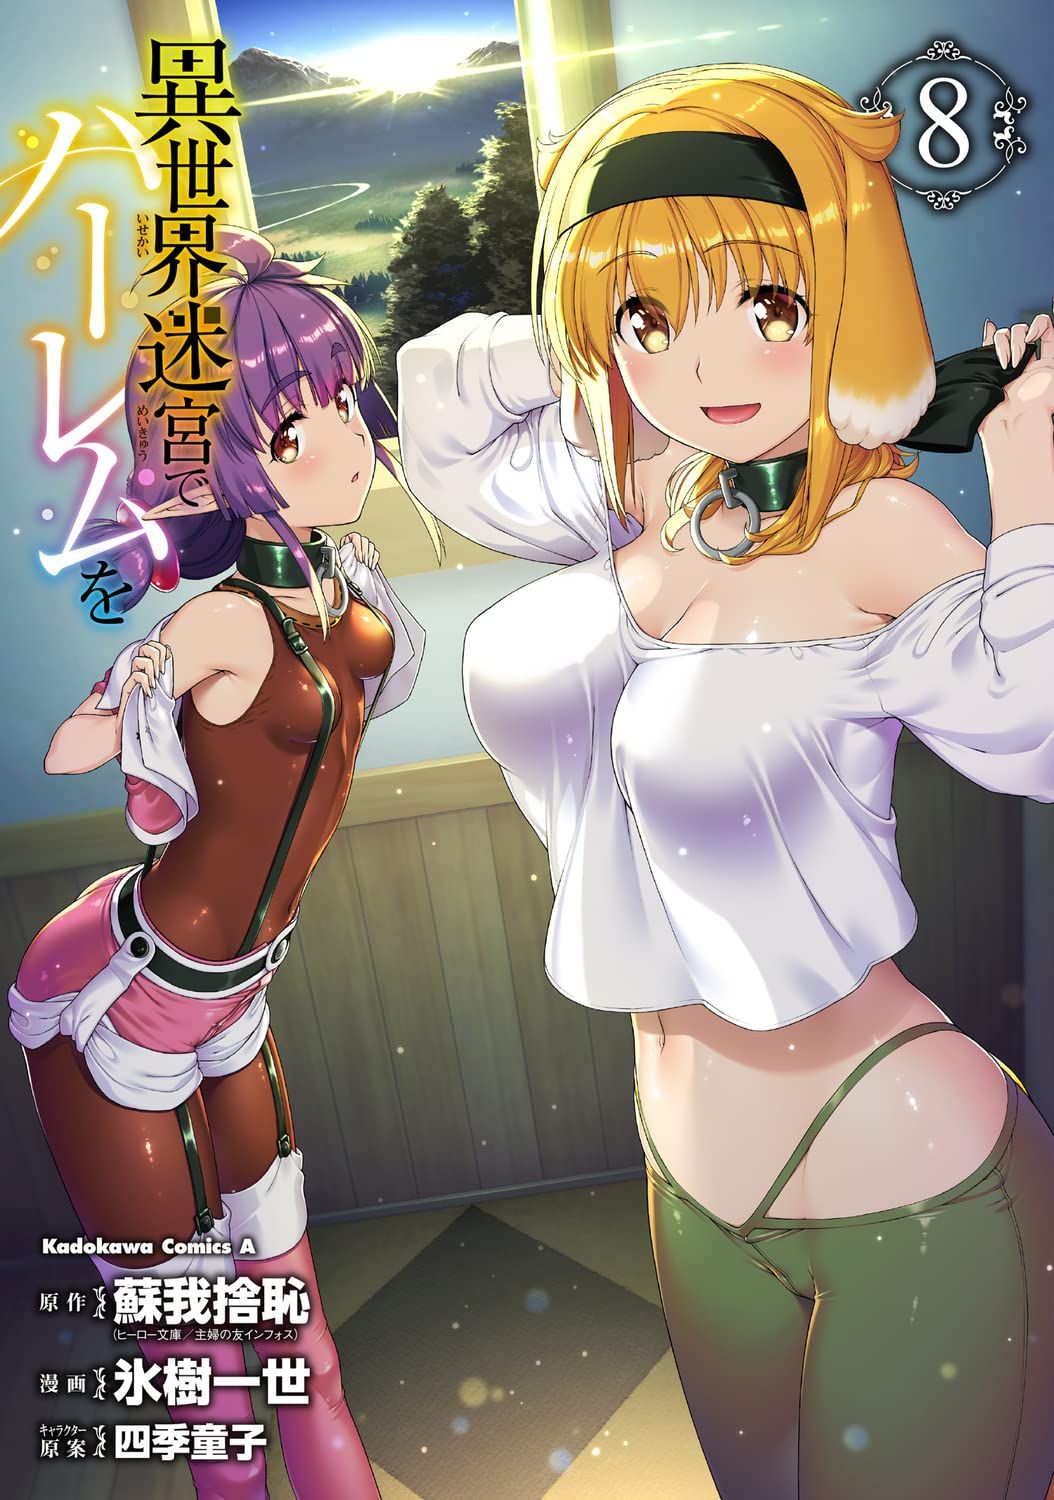 Isekai Meikyuu de Harem wo - Harem in the Labyrinth of Another World - Animes  Online